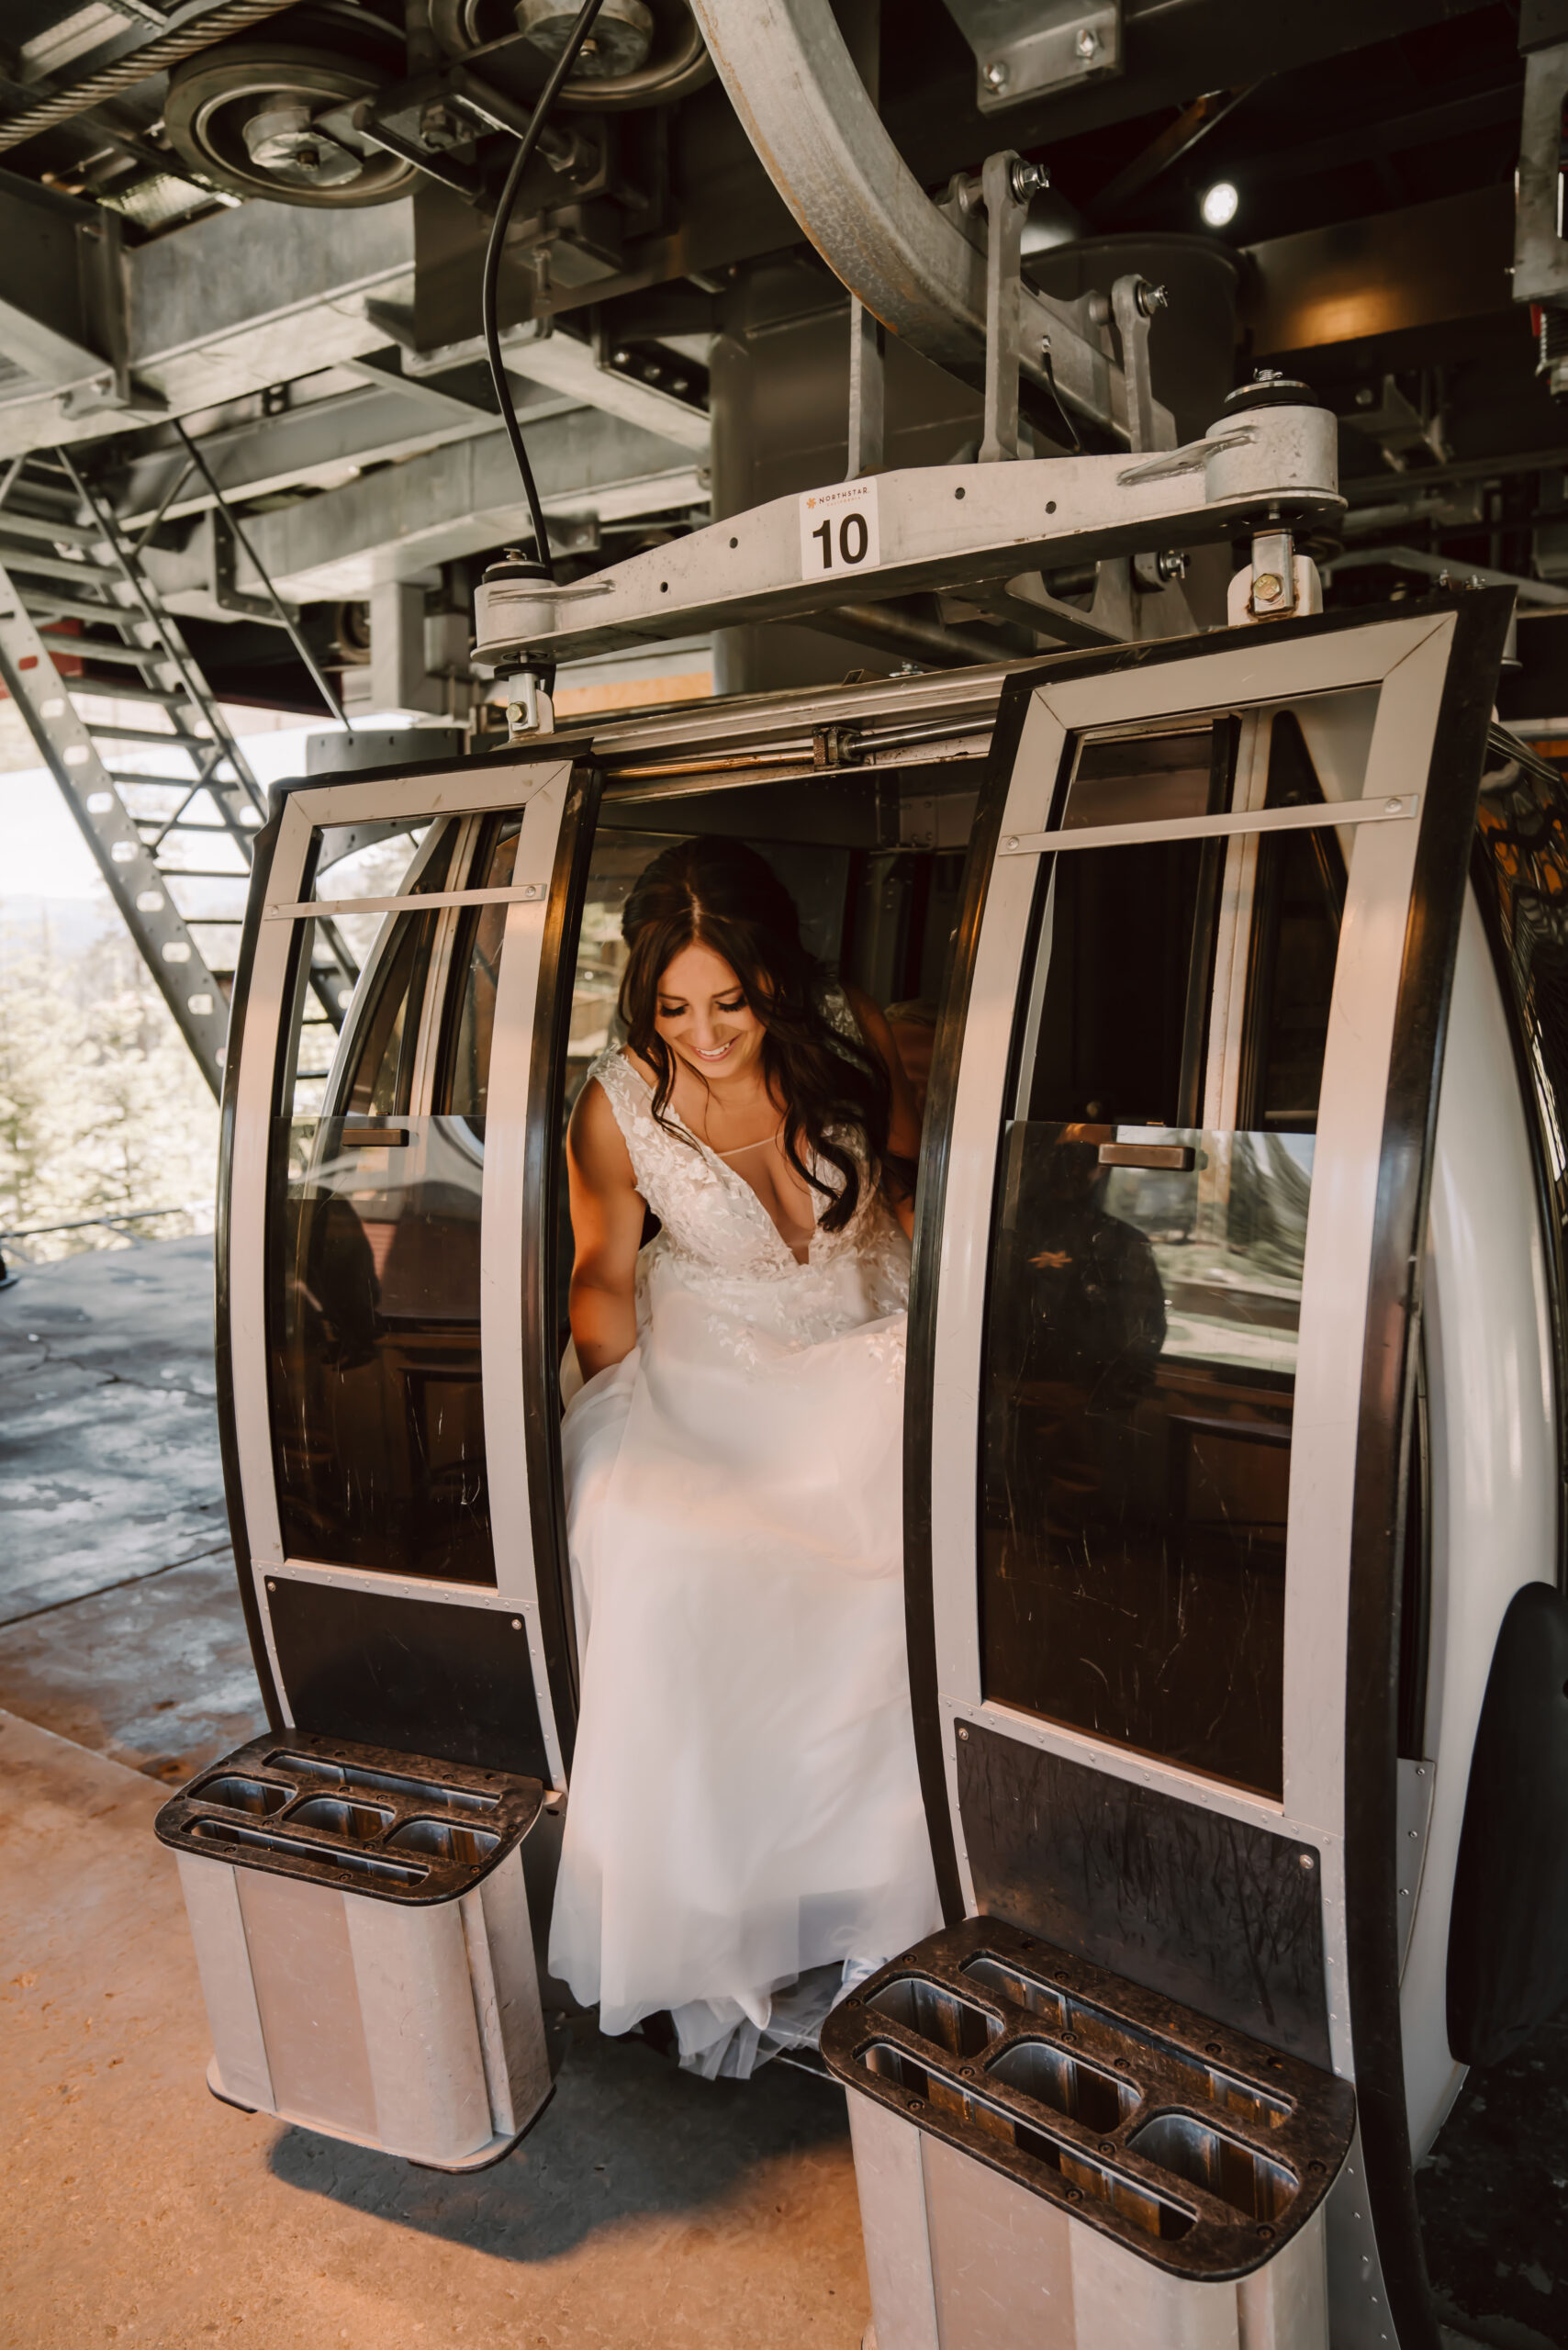 A bride getting out of a gondola ride on her elopement day activity